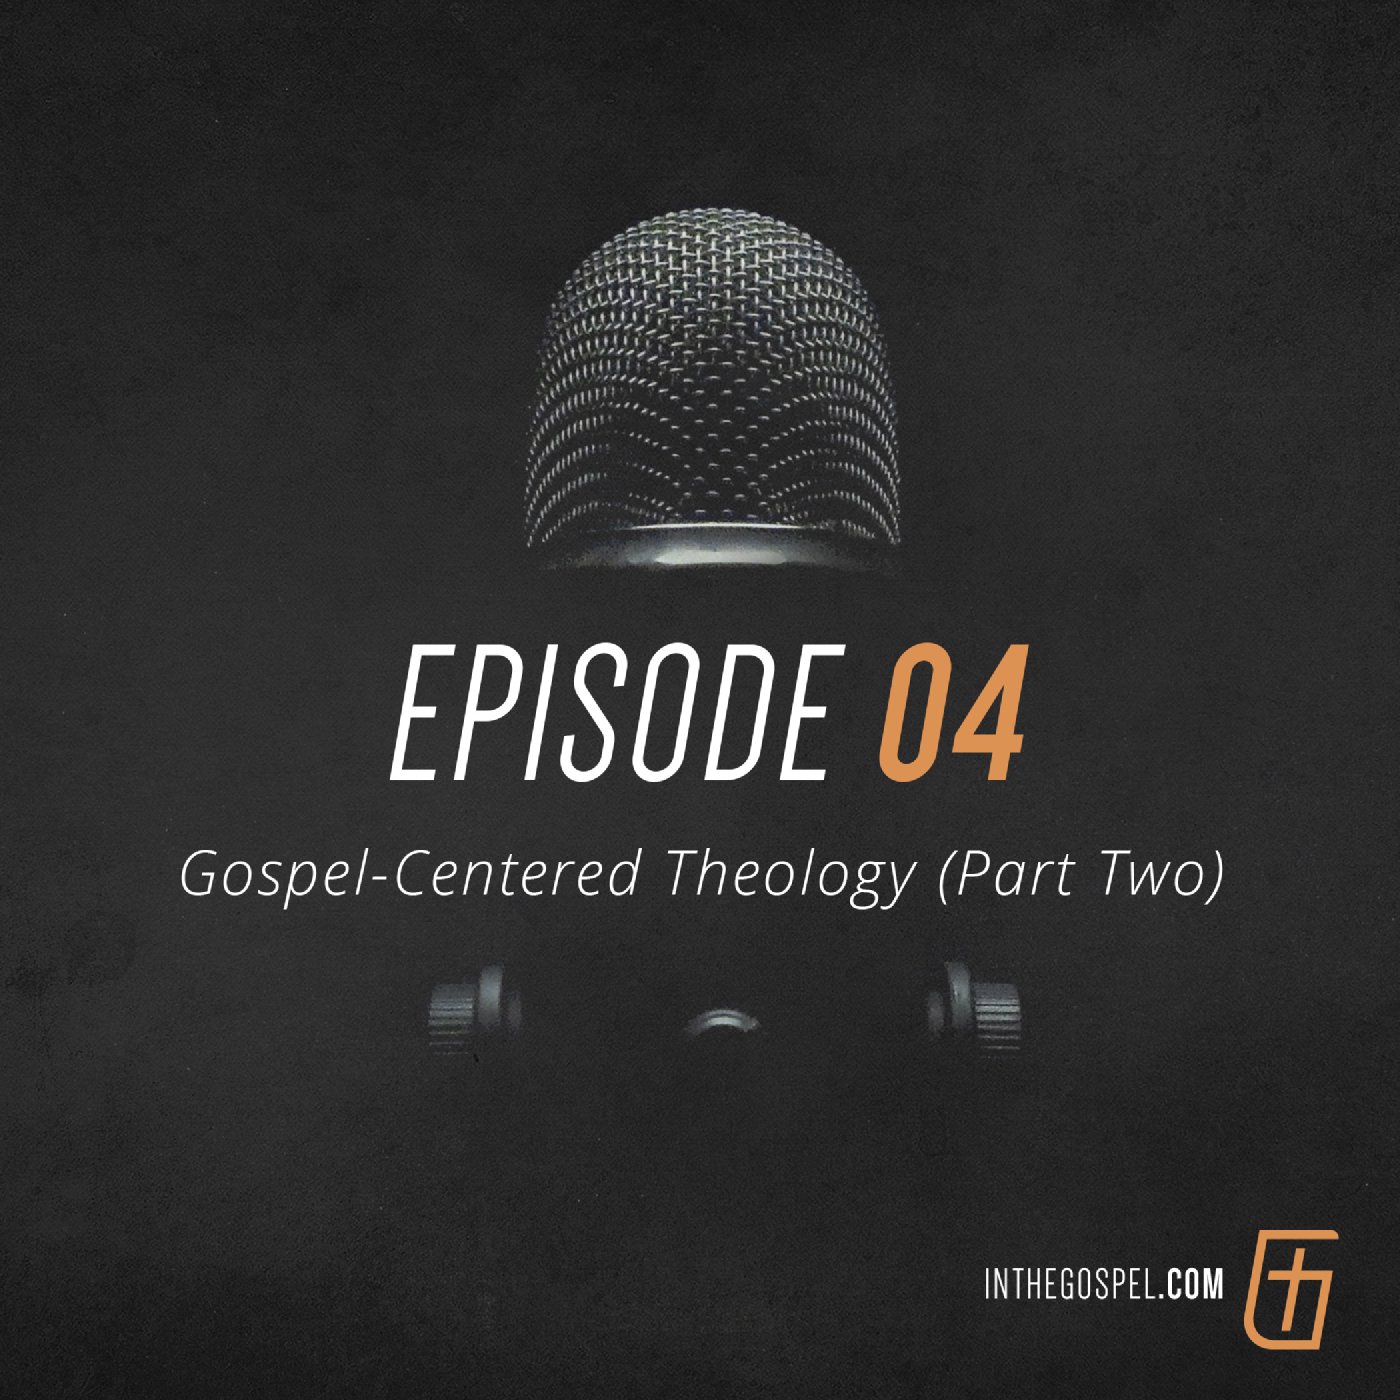 Episode 04: Gospel-Centered Theology (Part Two)